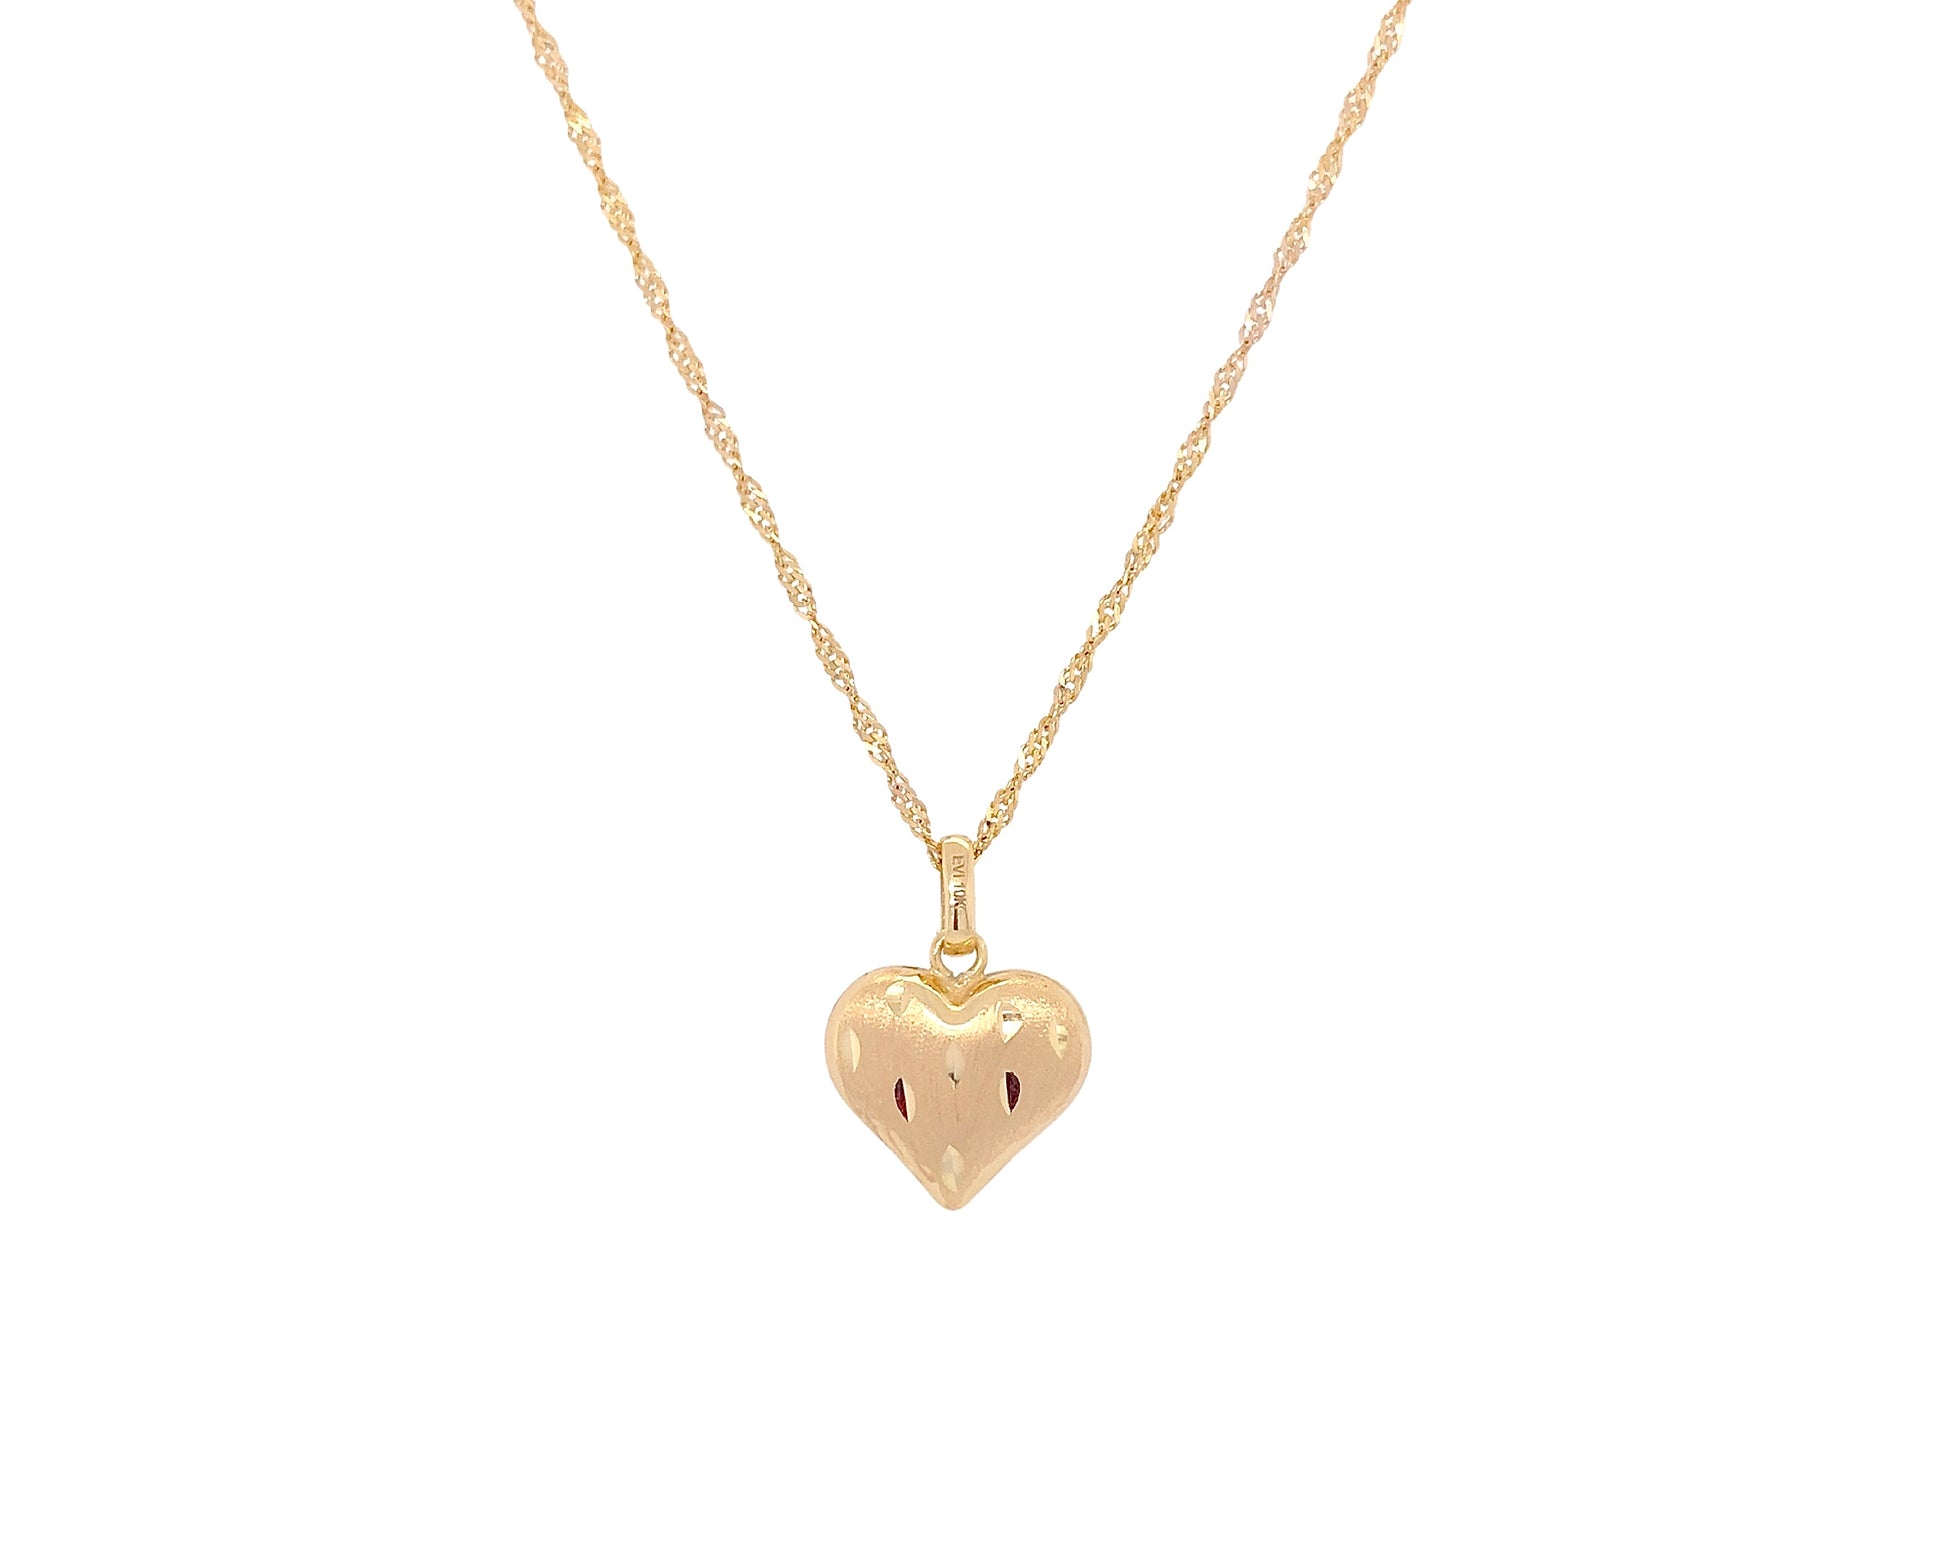 10k yellow gold puff heart charm with chain